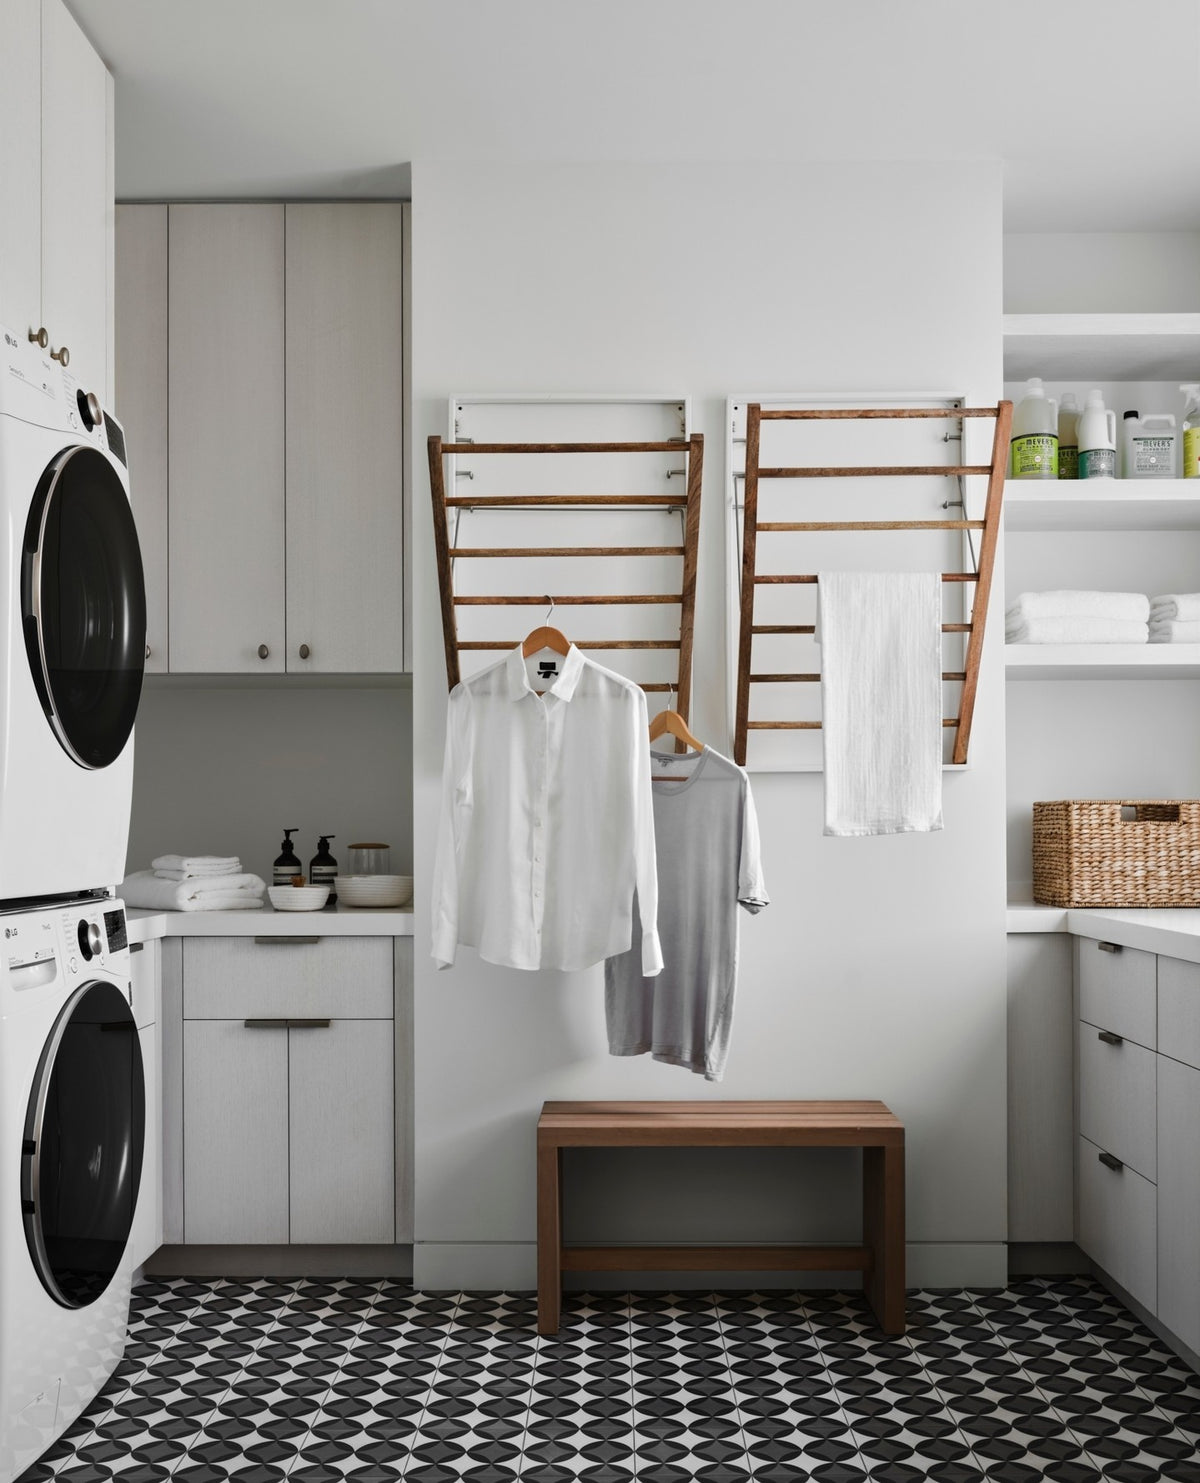 A laundry room with a black and white tiled floor, white walls and fold down wooden laundry racks.